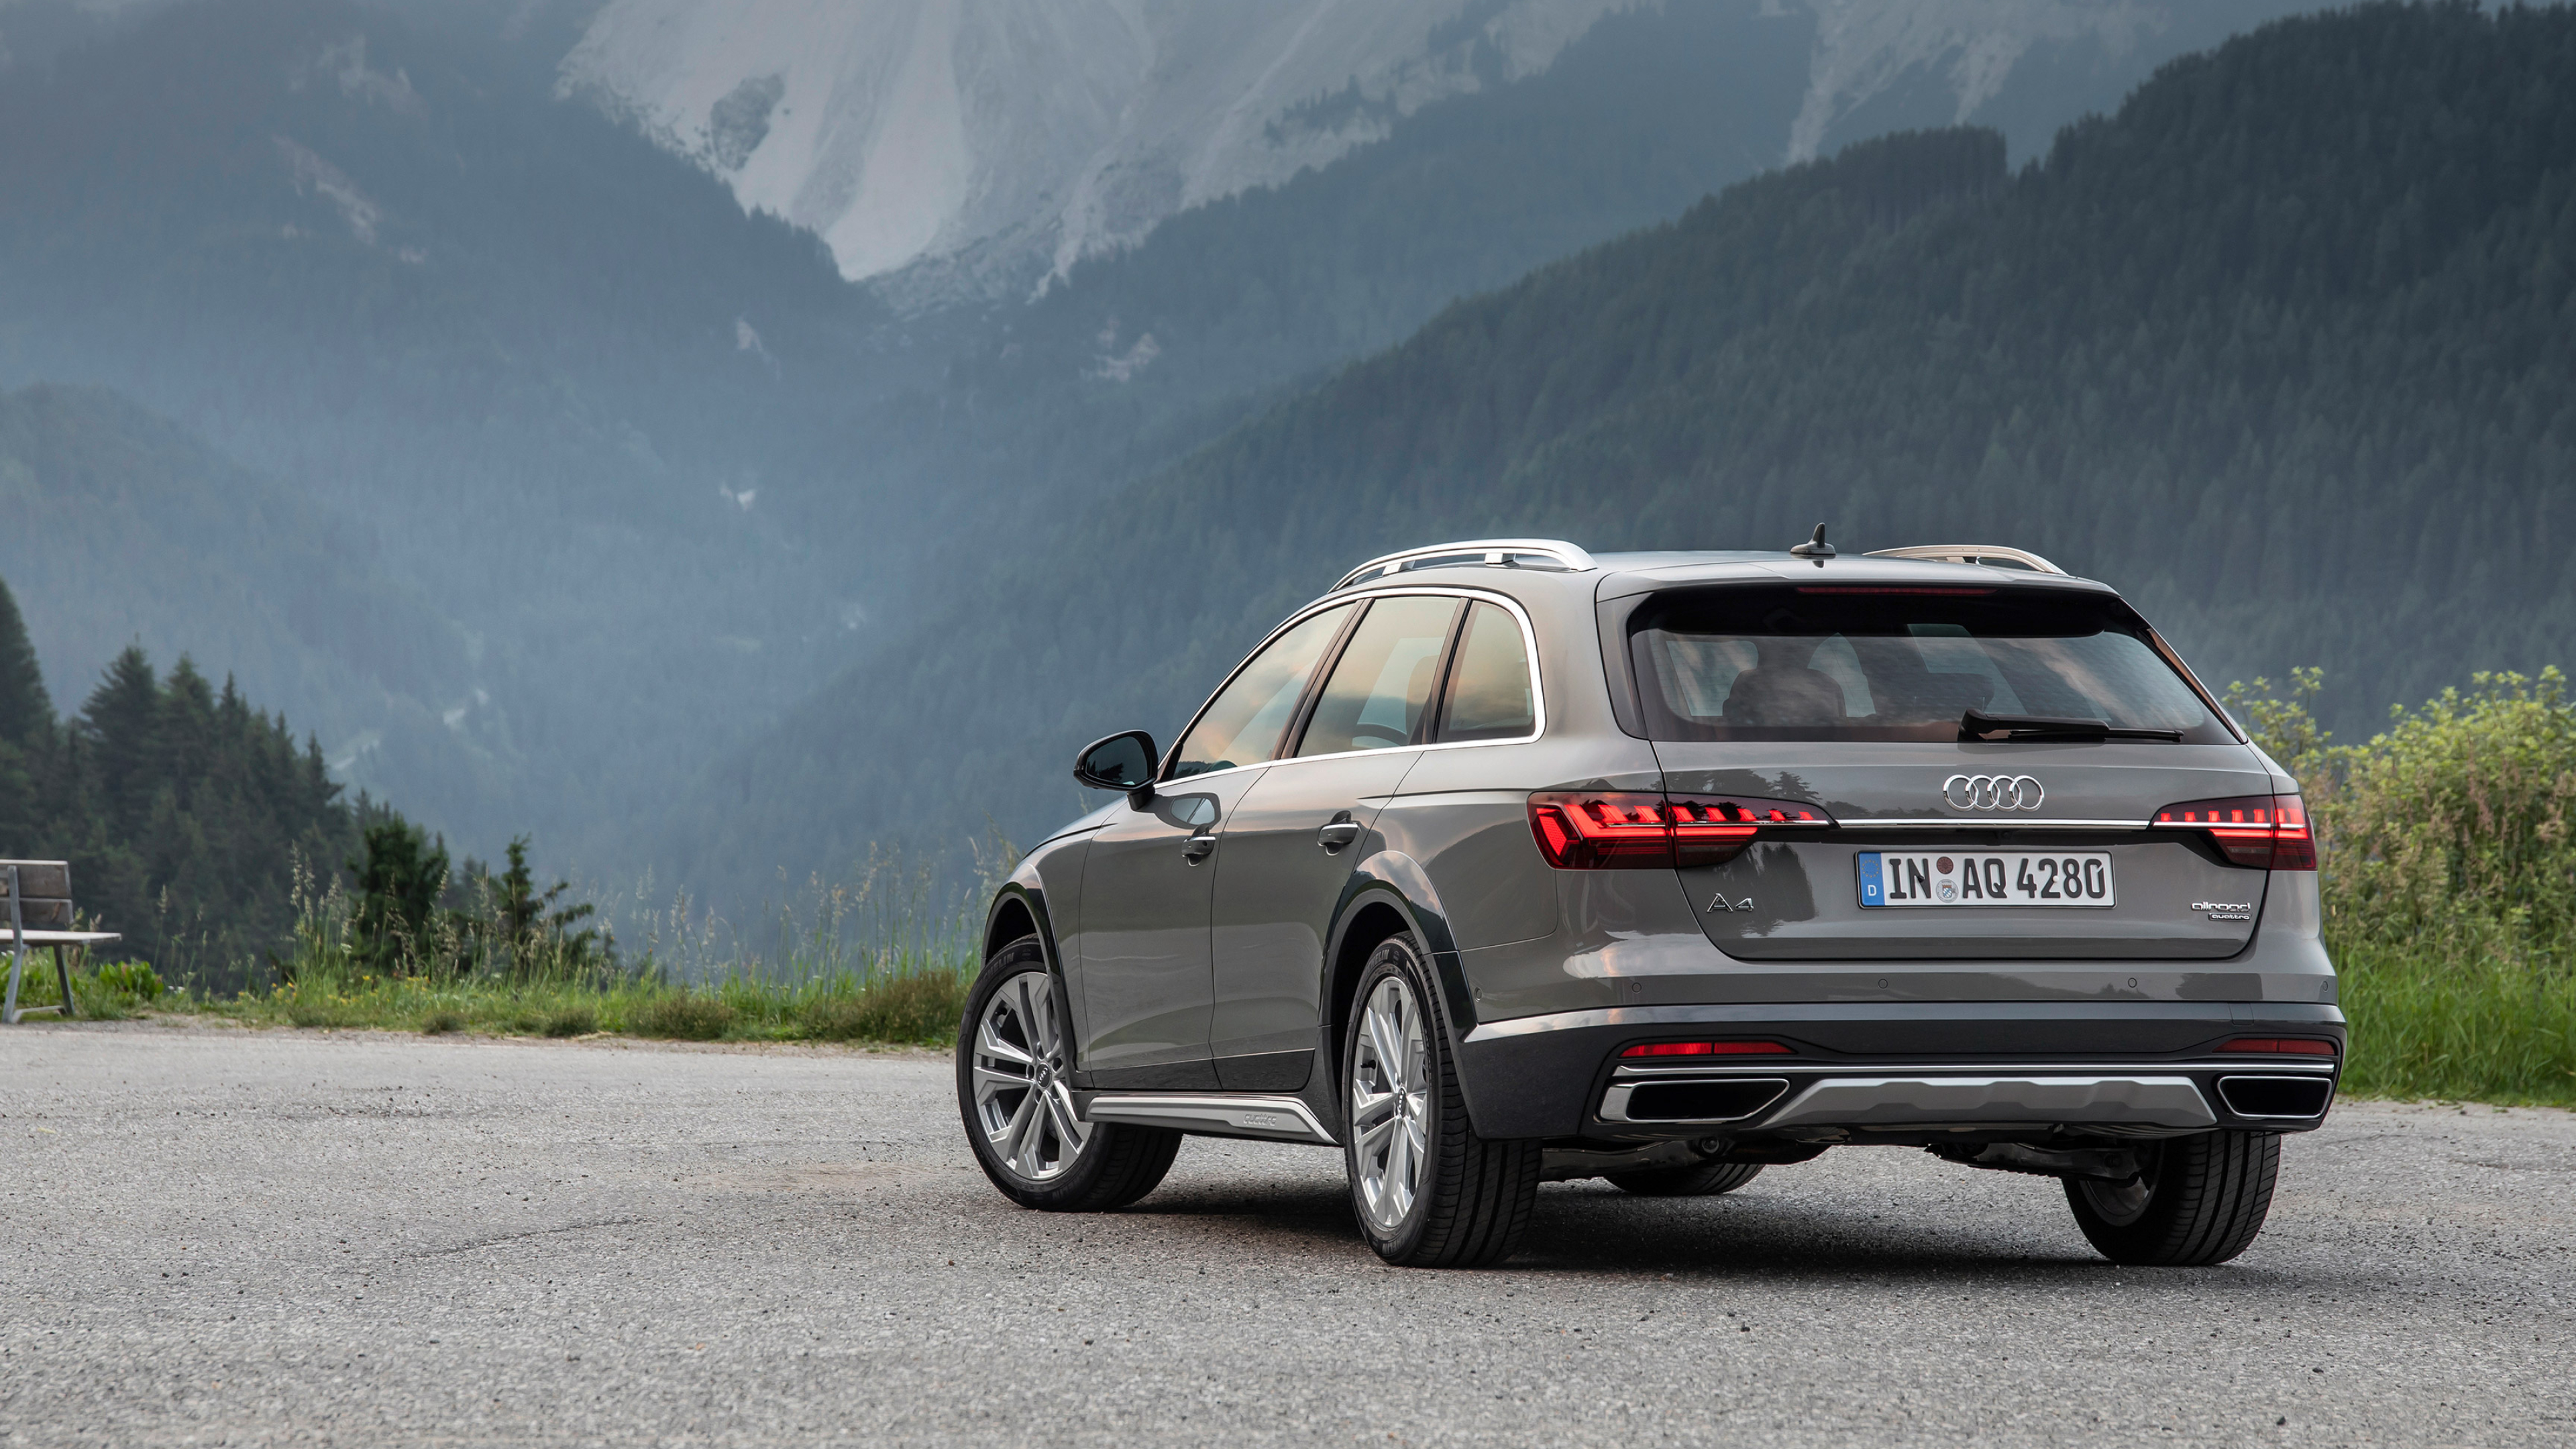 Audi A4 Allroad, Quattro performance, Luxury on wheels, Sporty and rugged, 3840x2160 4K Desktop